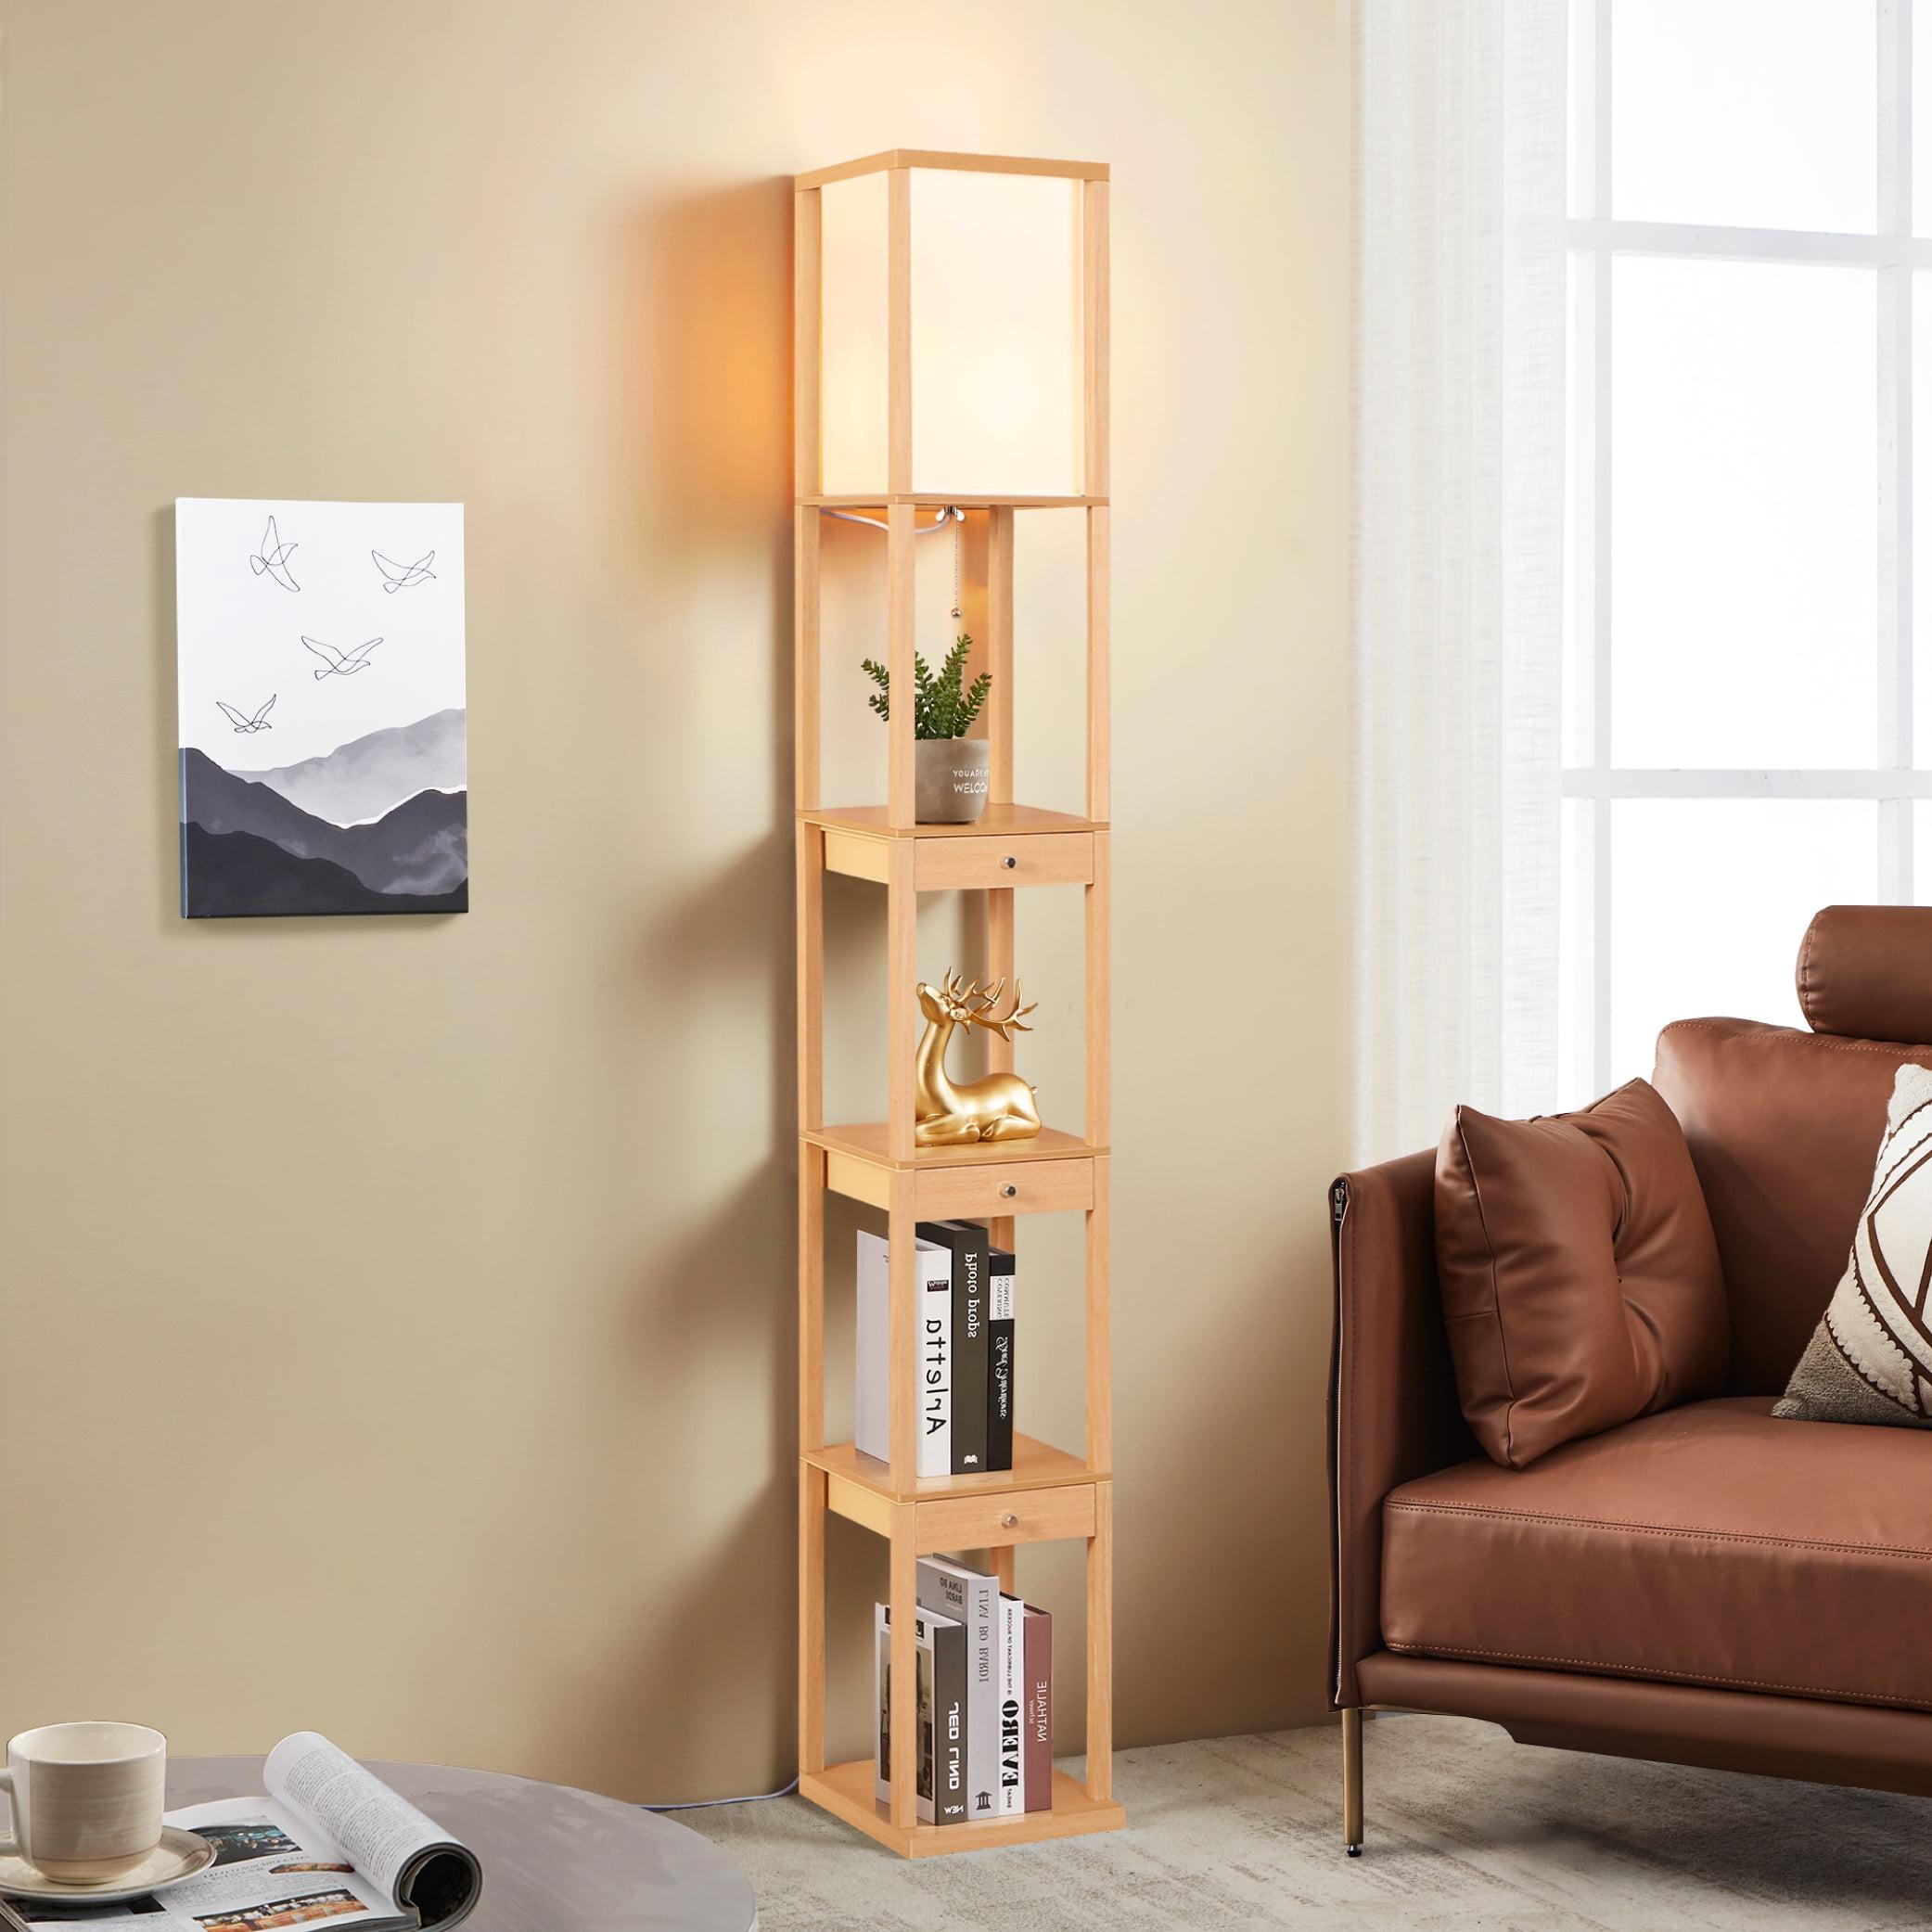 72" Natural Wood LED Floor Lamp with Shelves and Drawers